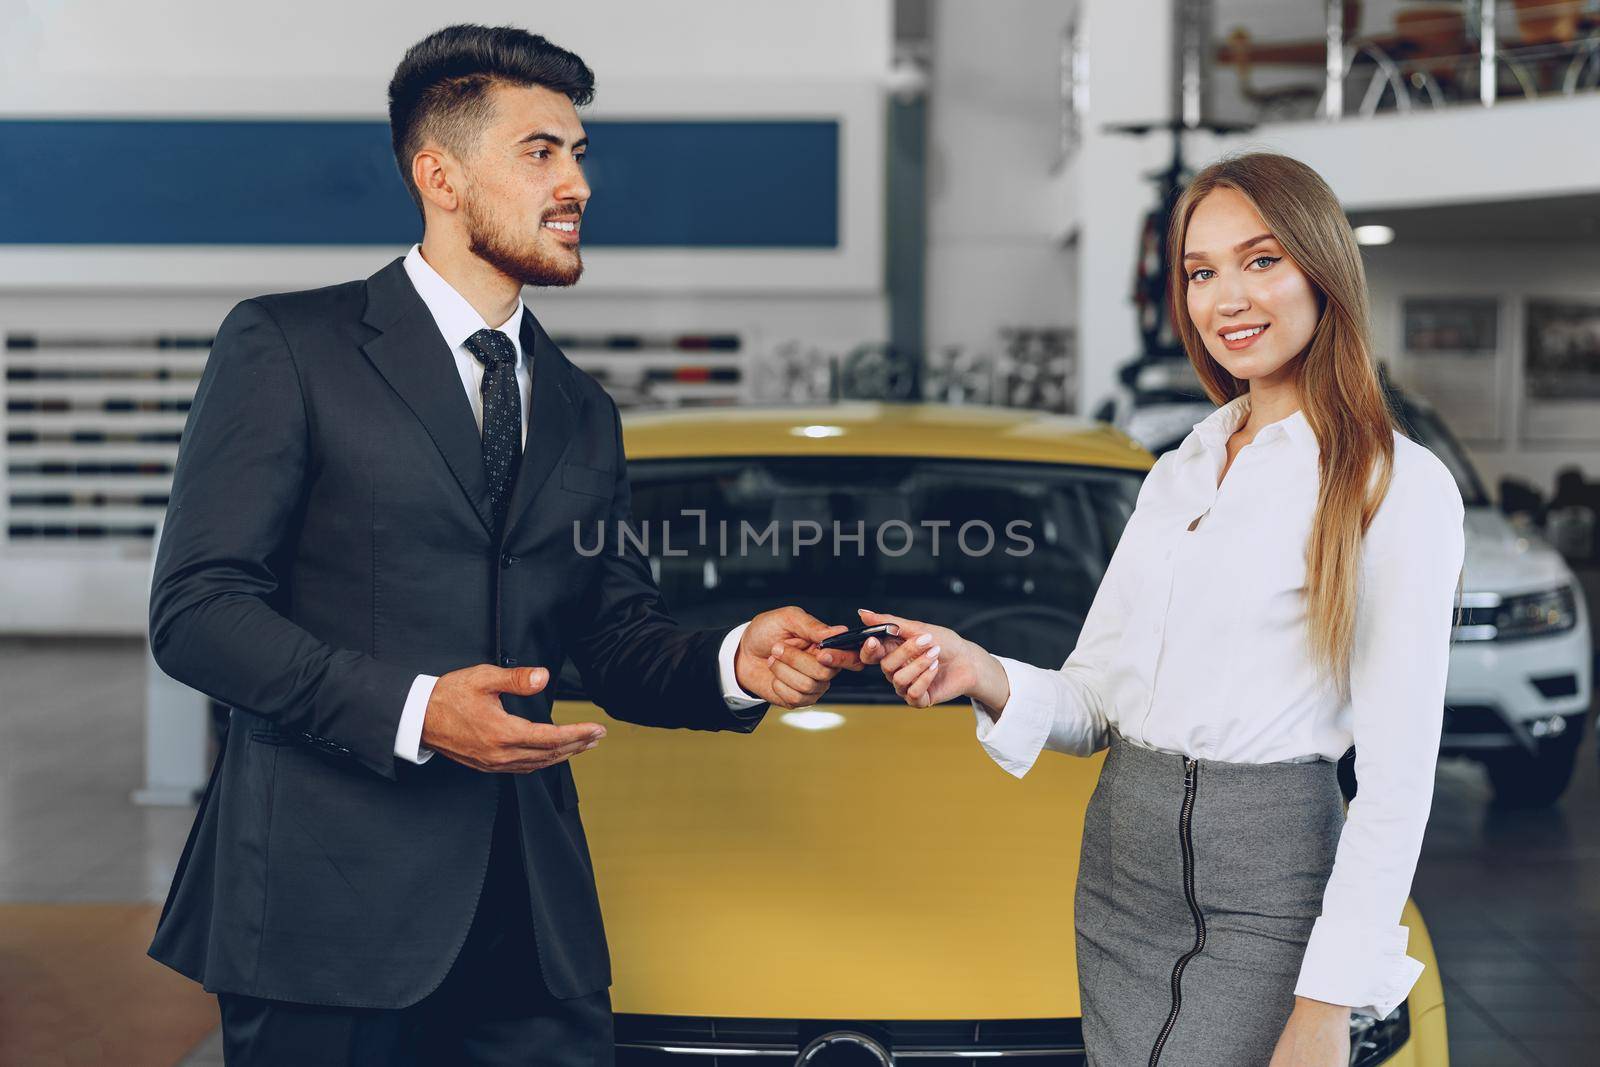 Young attractive woman buying a new car in car salon close up